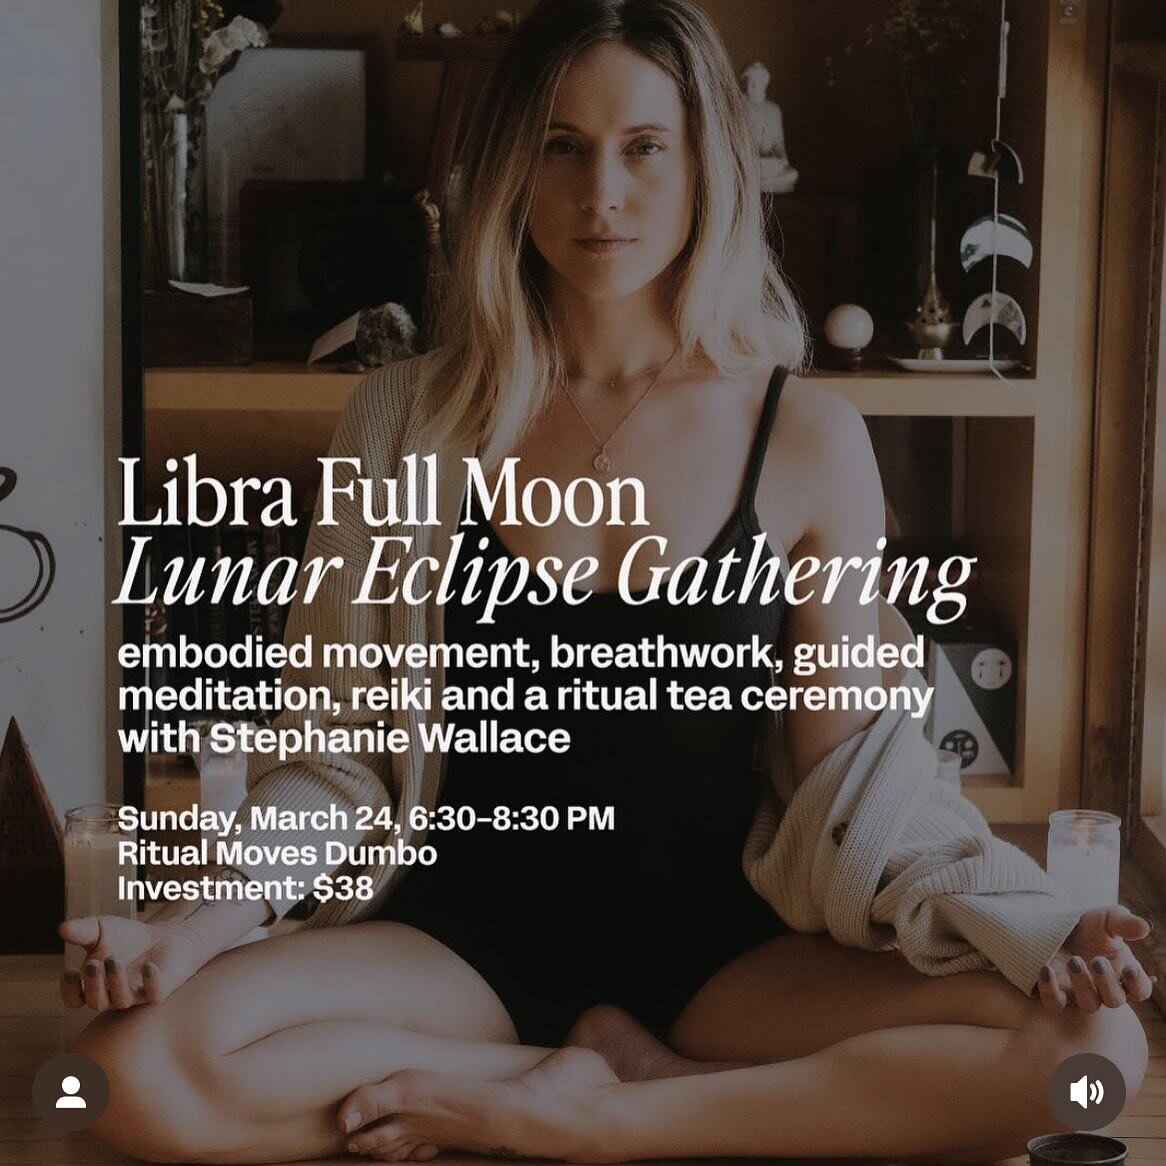 New York Loves! 

Join me this Sunday for a VERY special and nourishing gathering at @ritualmoves in Dumbo 😍

In honor + observance of the first lunar eclipse of the year, the arrival of spring, and the profound energy shifts this season + portal br